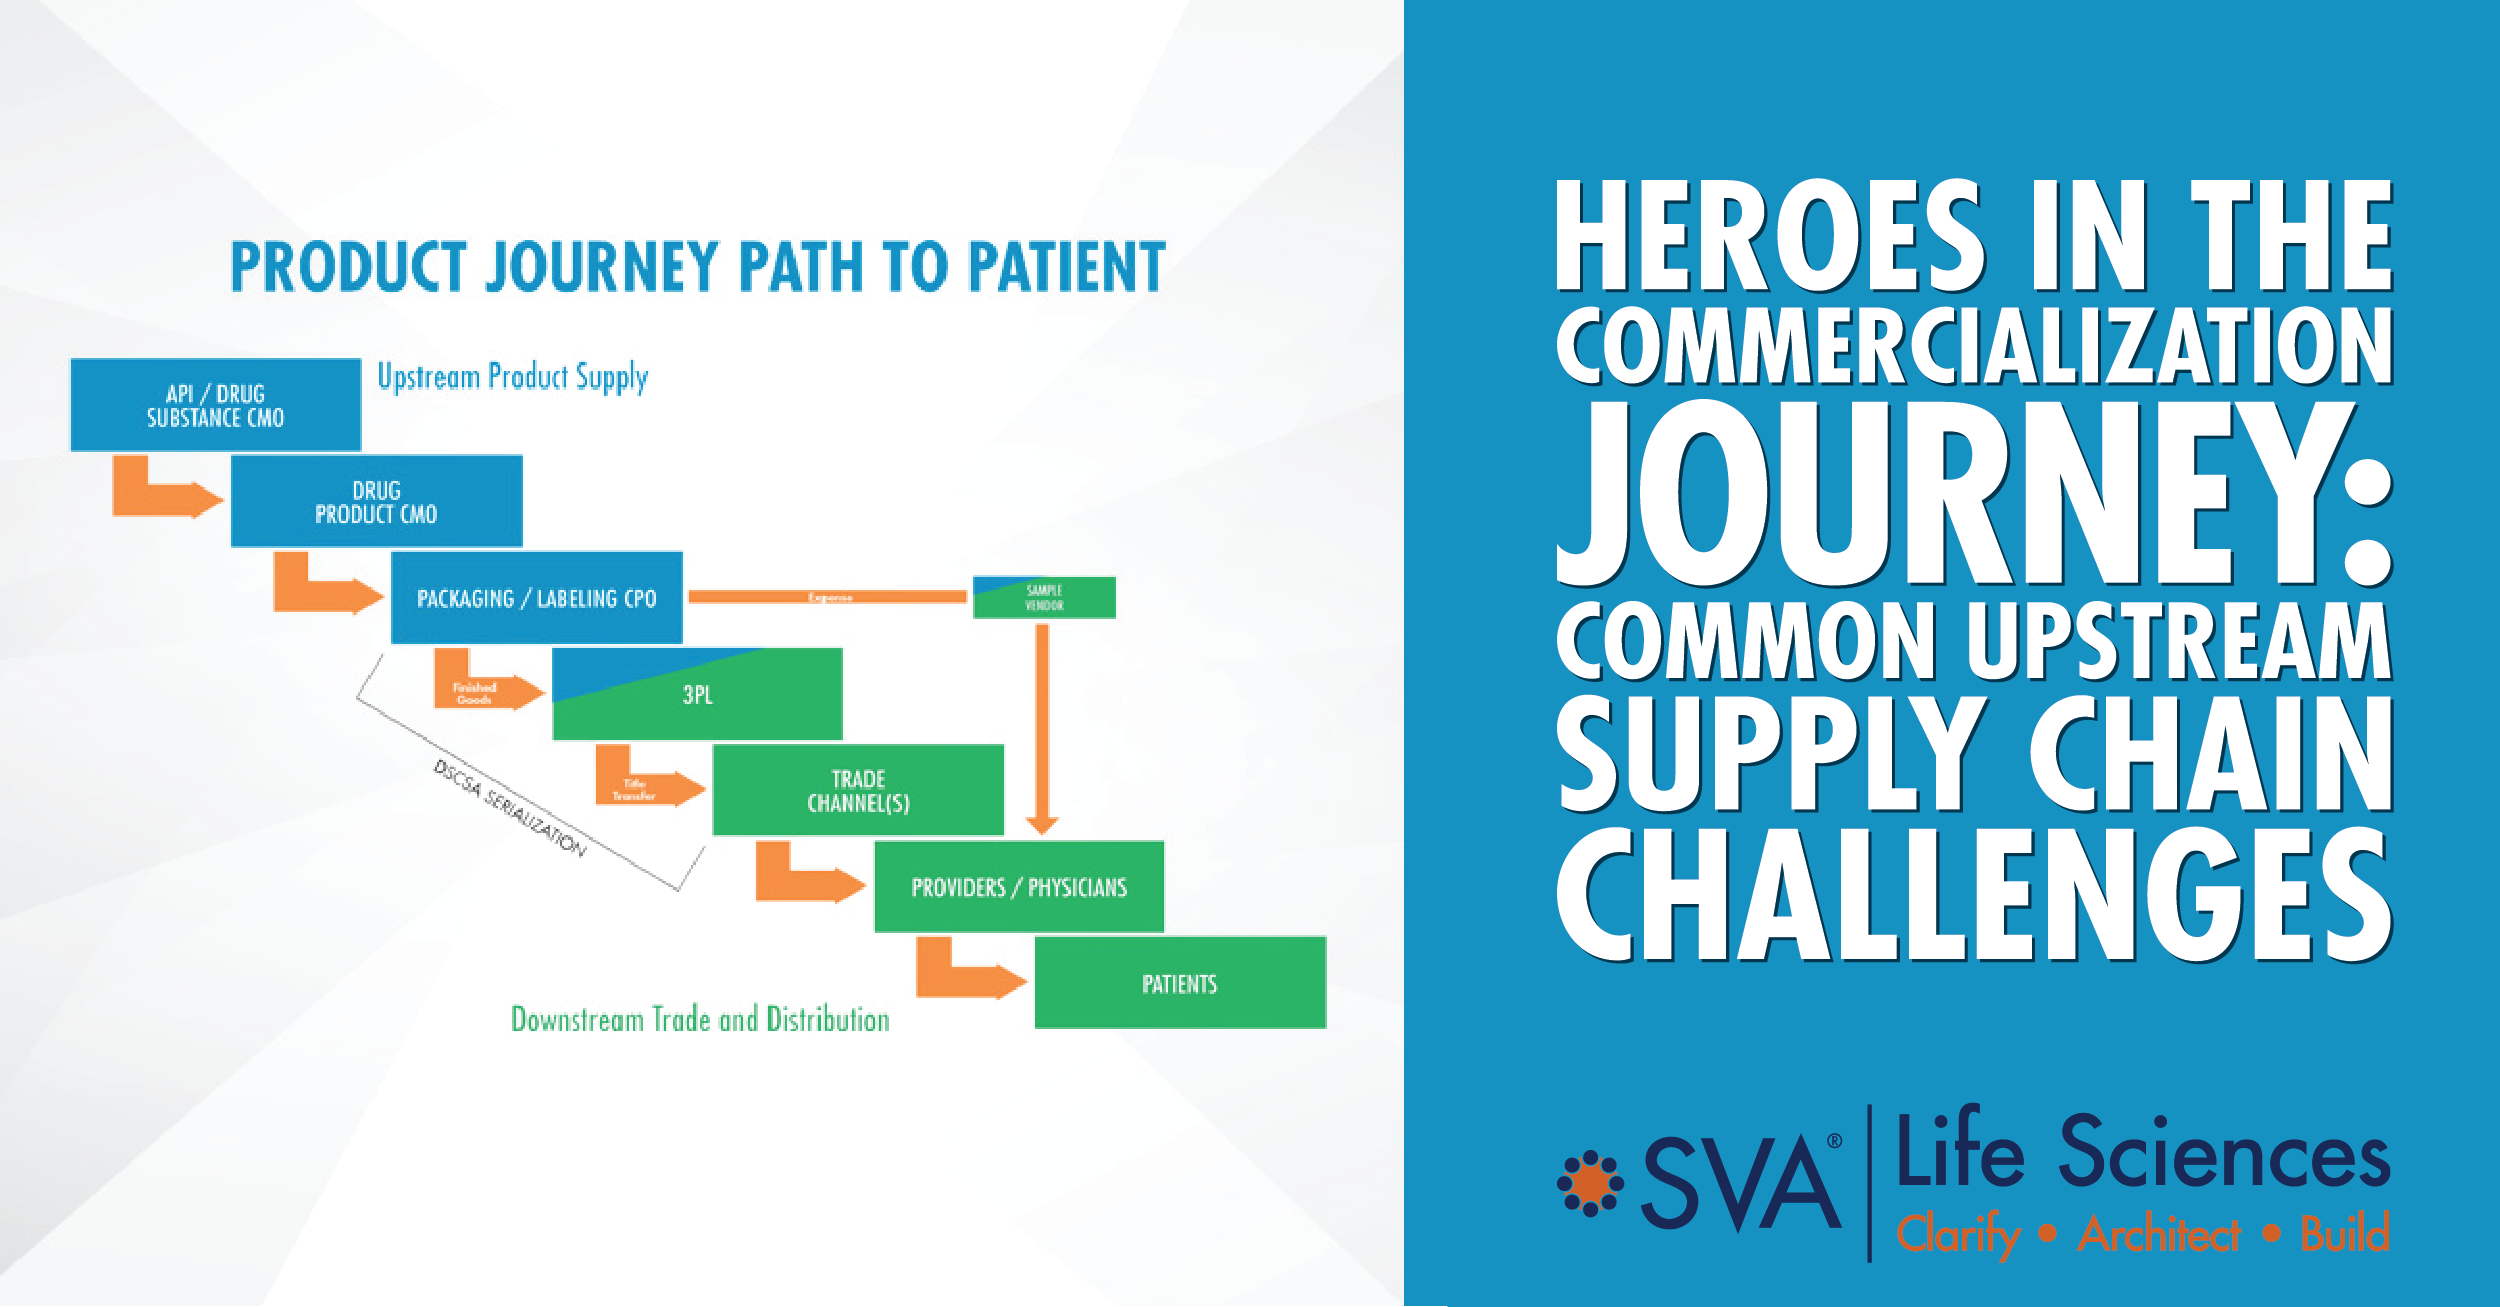 Heroes in the Commercialization Journey: Common Upstream Supply Chain Challenges